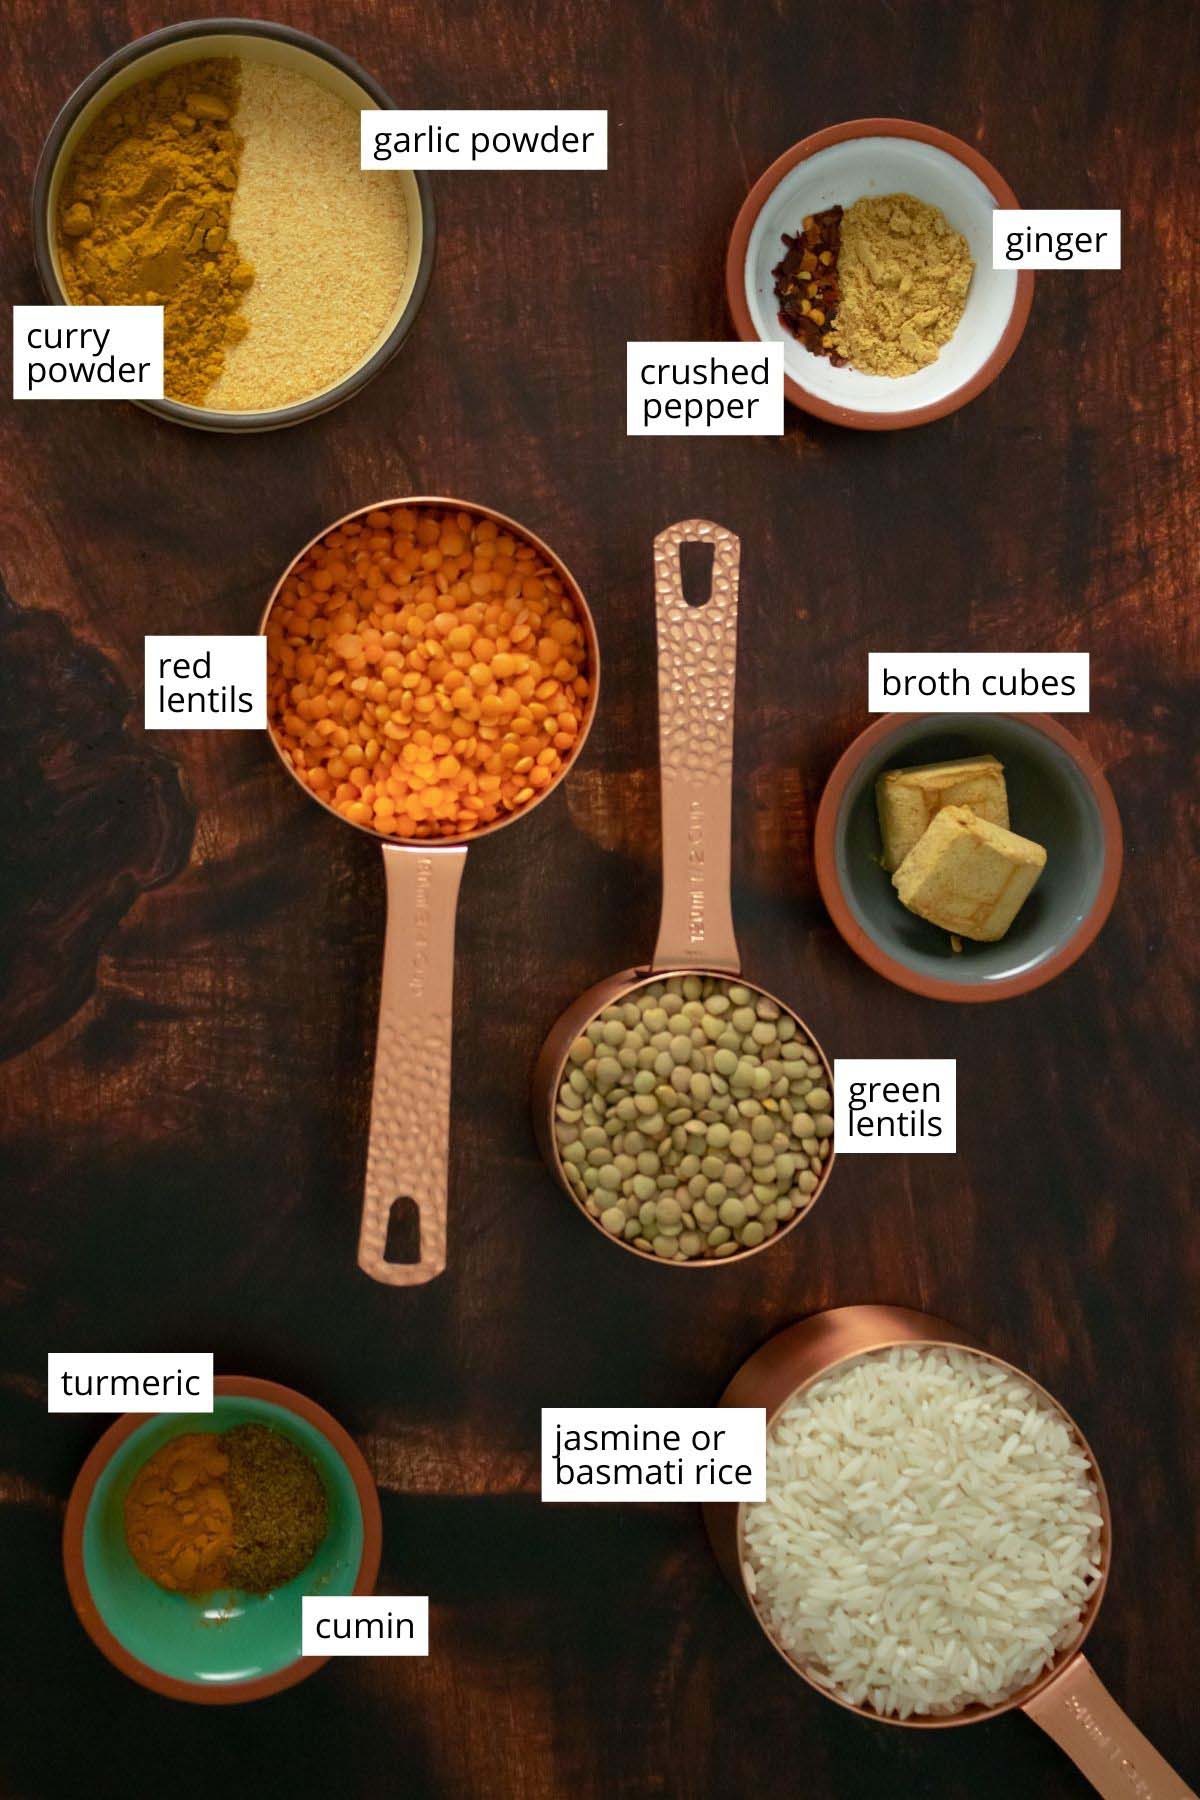 red and green lentils, rice, and spices in bowls on a wooden table